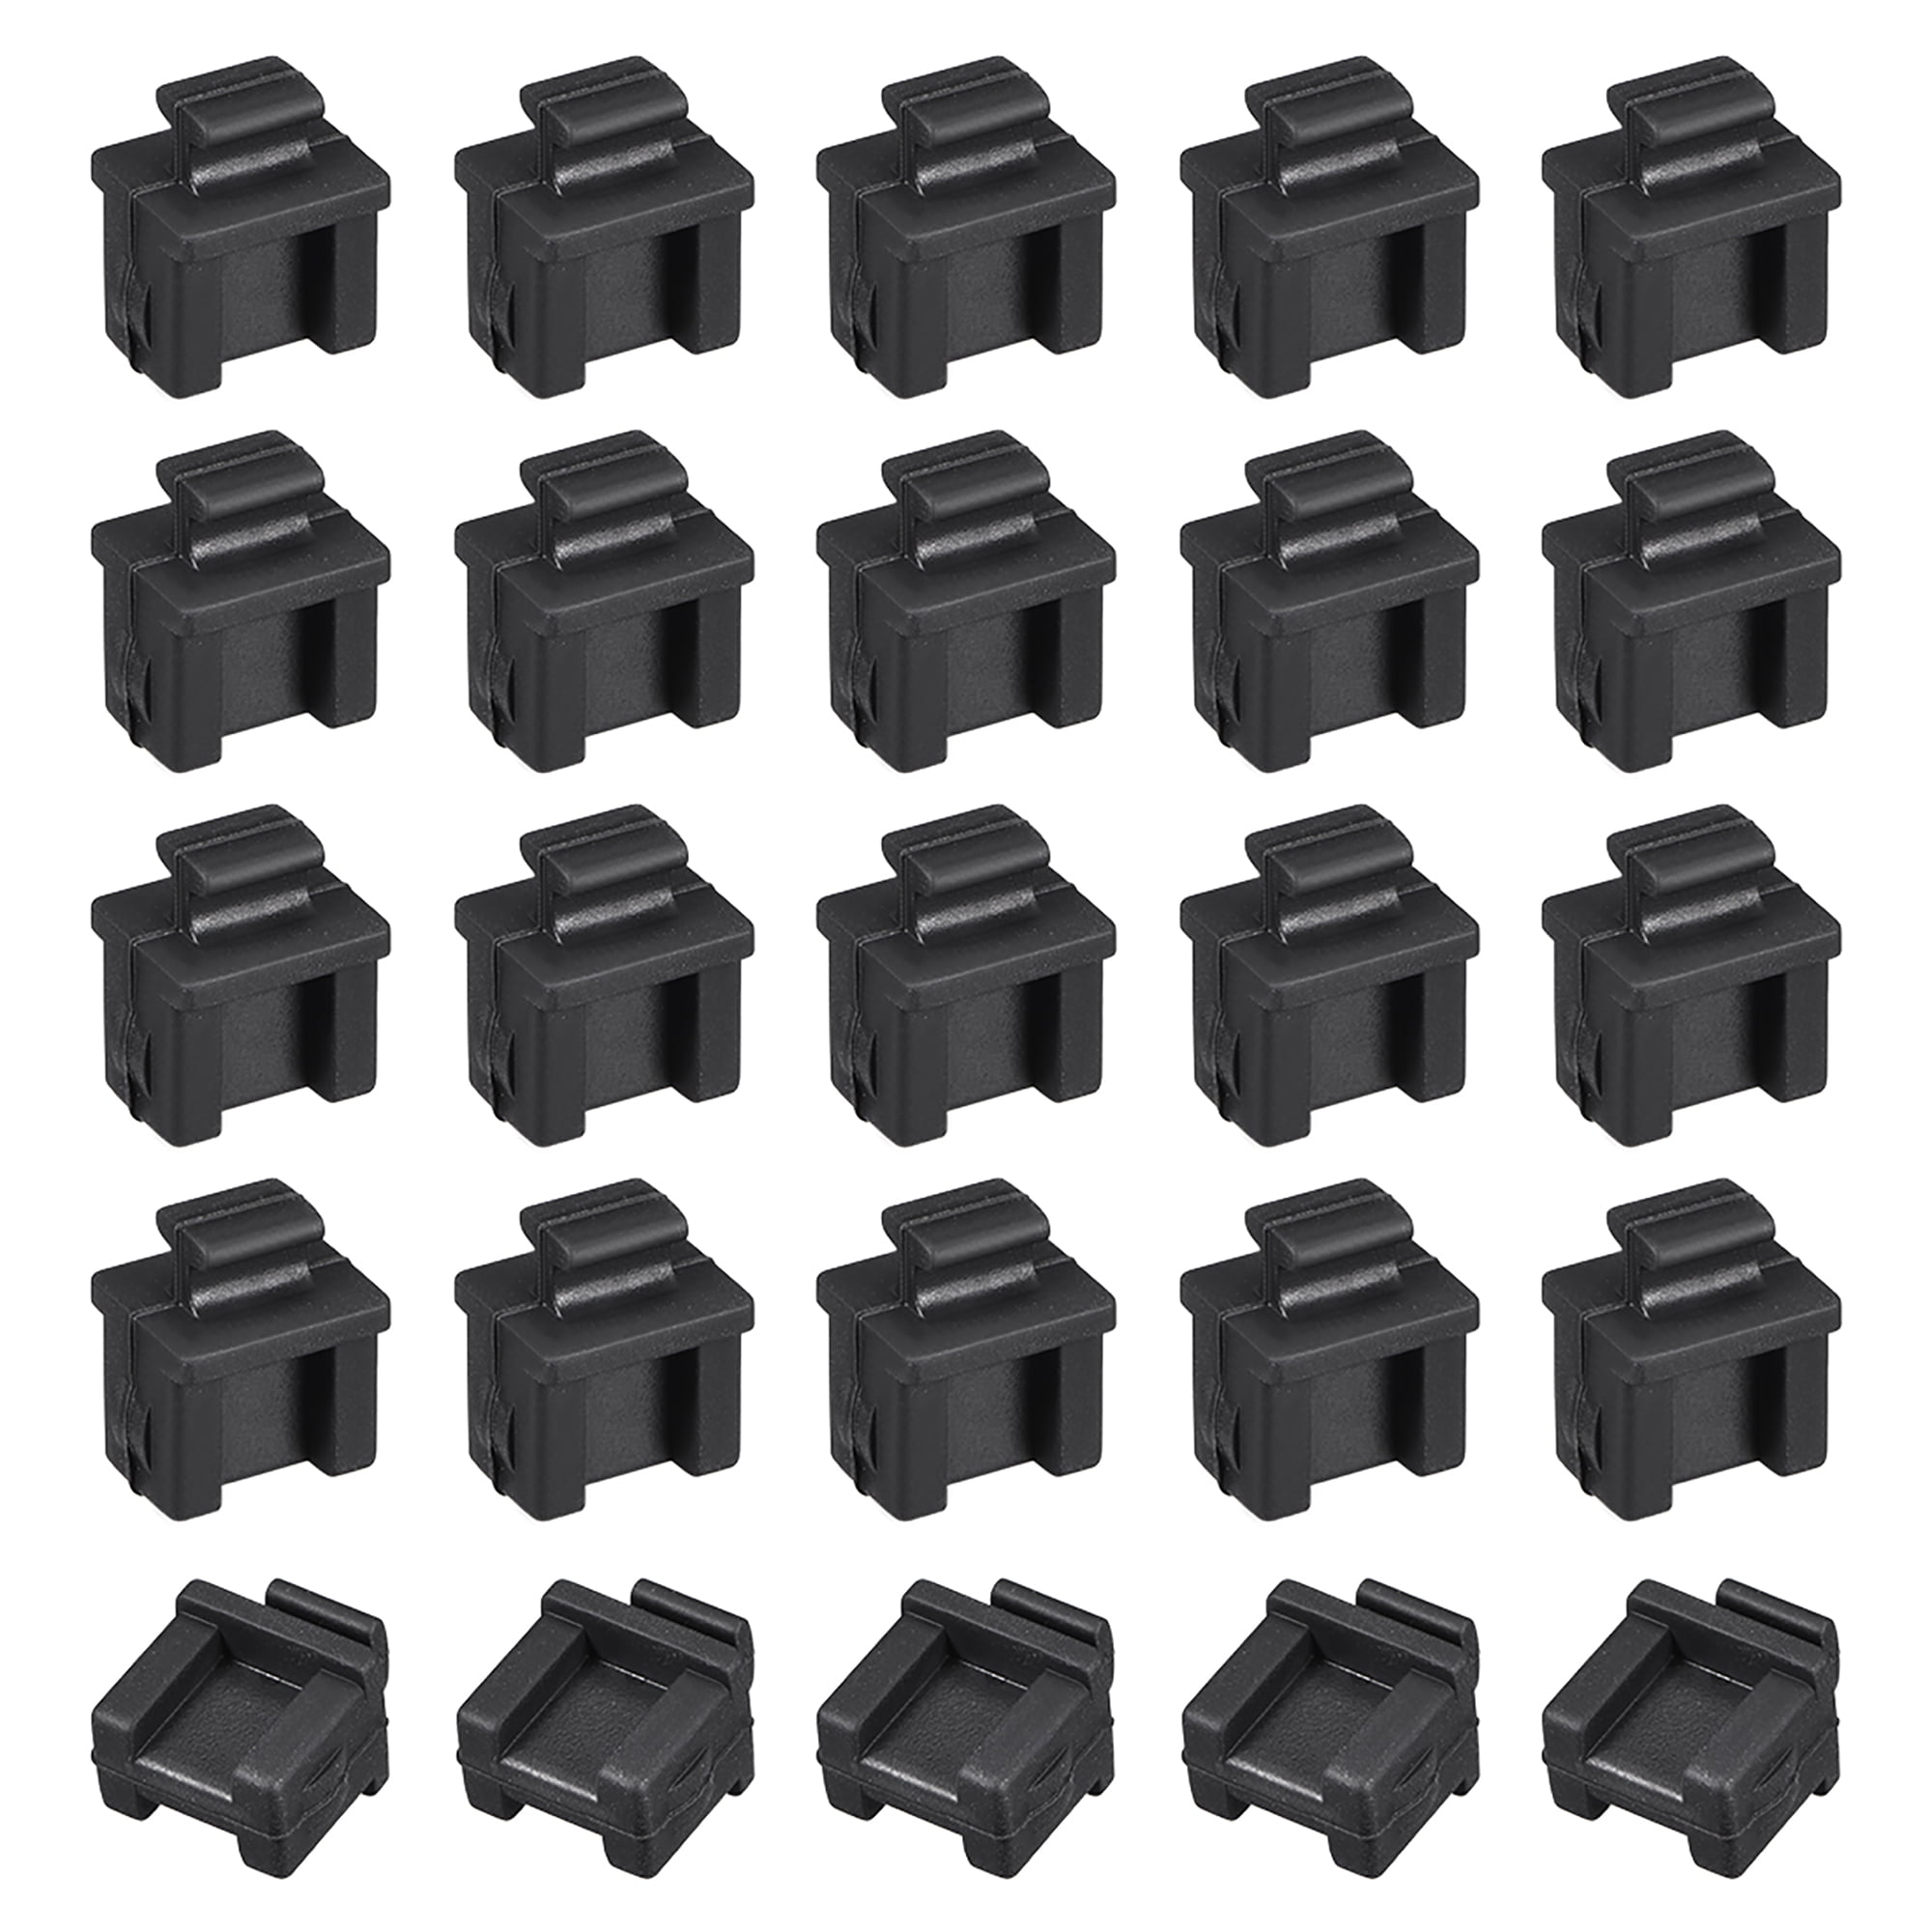 uxcell SFP-A Port Anti-Dust Stopper Cap Cover Black Silicone 20pcs